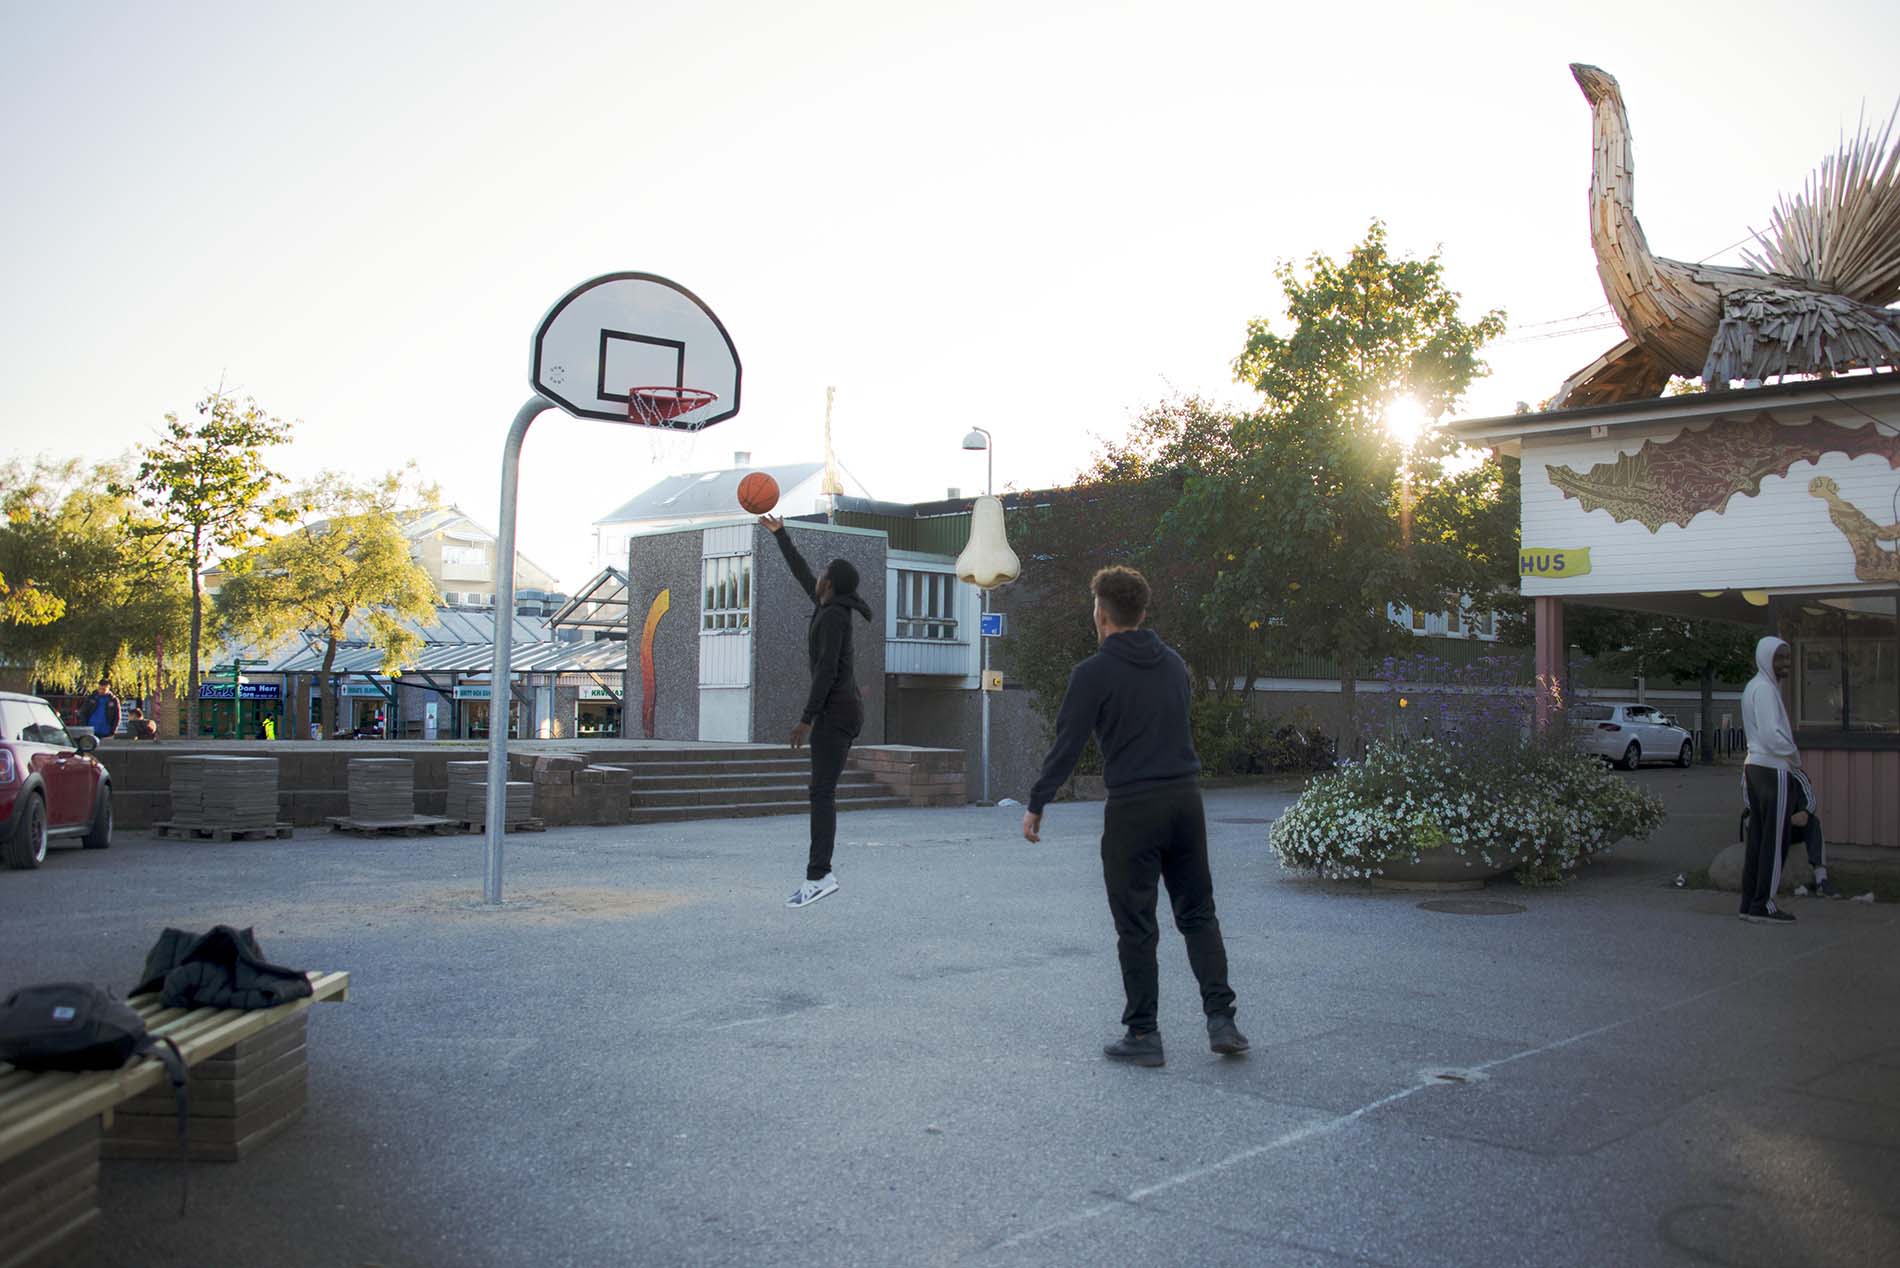 Two boys playing basketball. One is jumping towards the basket, the other is 5 meters away.